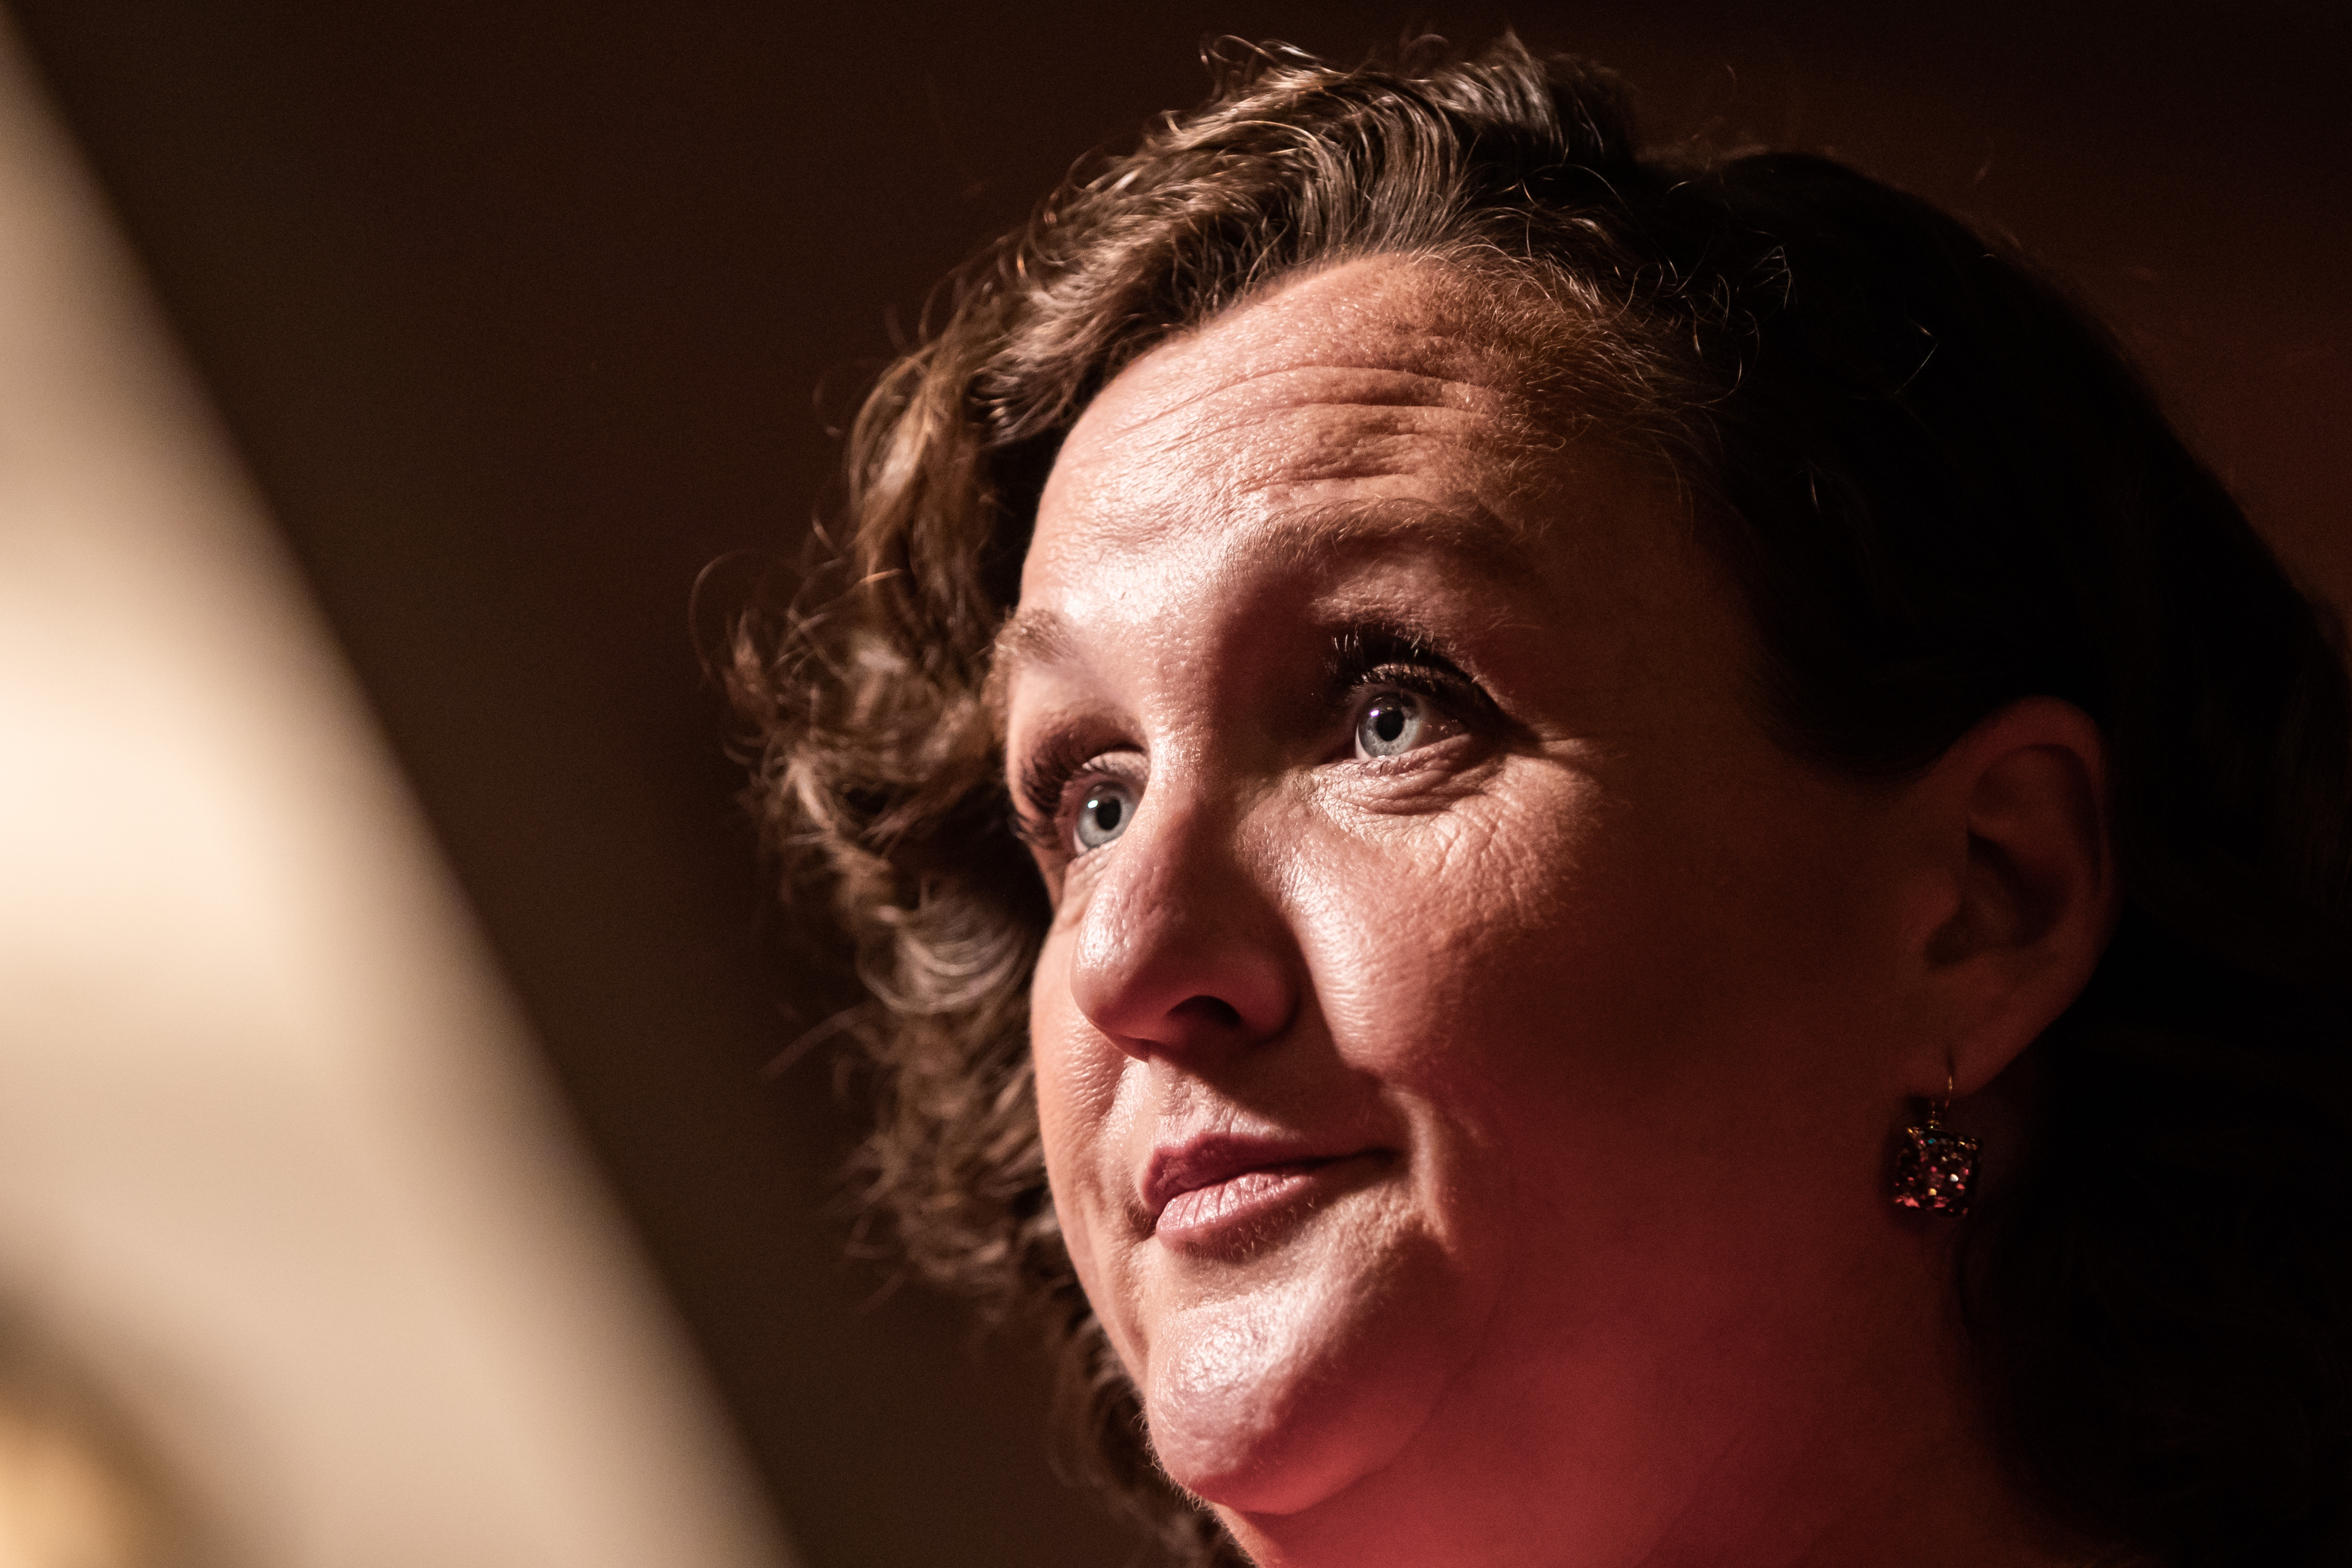 Rep. Katie Porter speaks during an event in Costa Mesa, Calif.